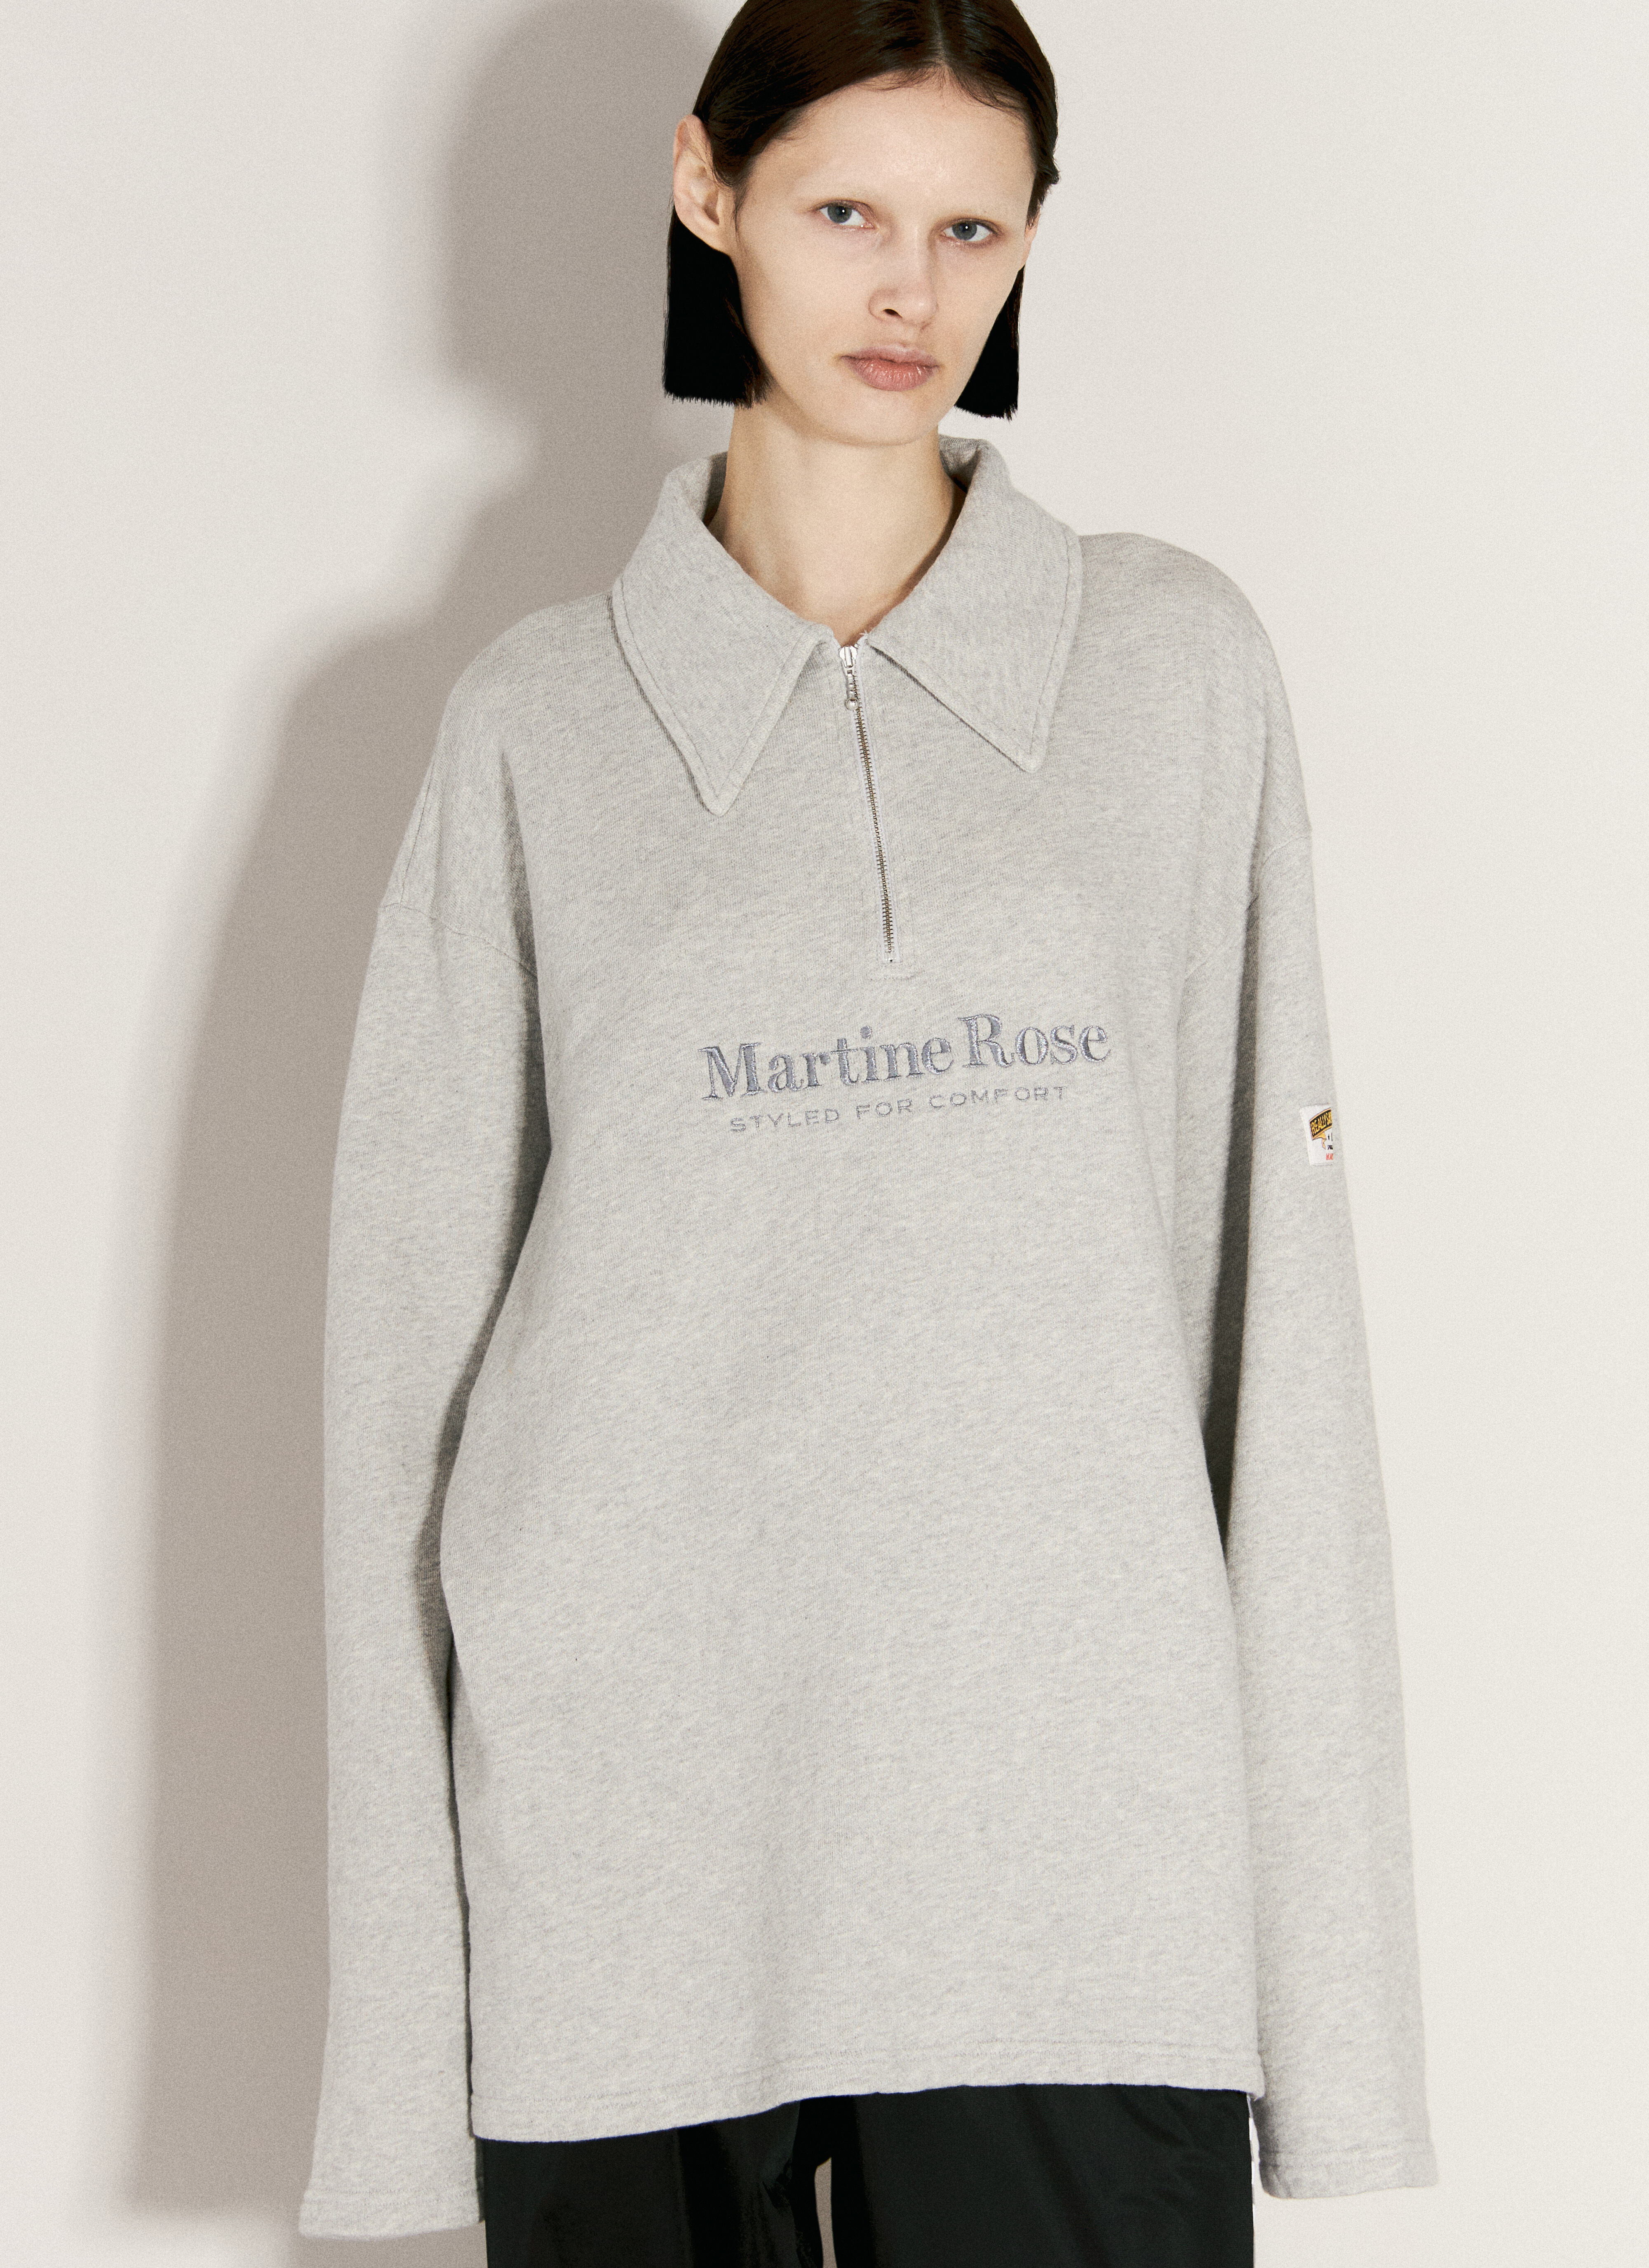 Martine Rose Logo Embroidery Zip-Up Polo Sweatshirt Pink mtr0255002